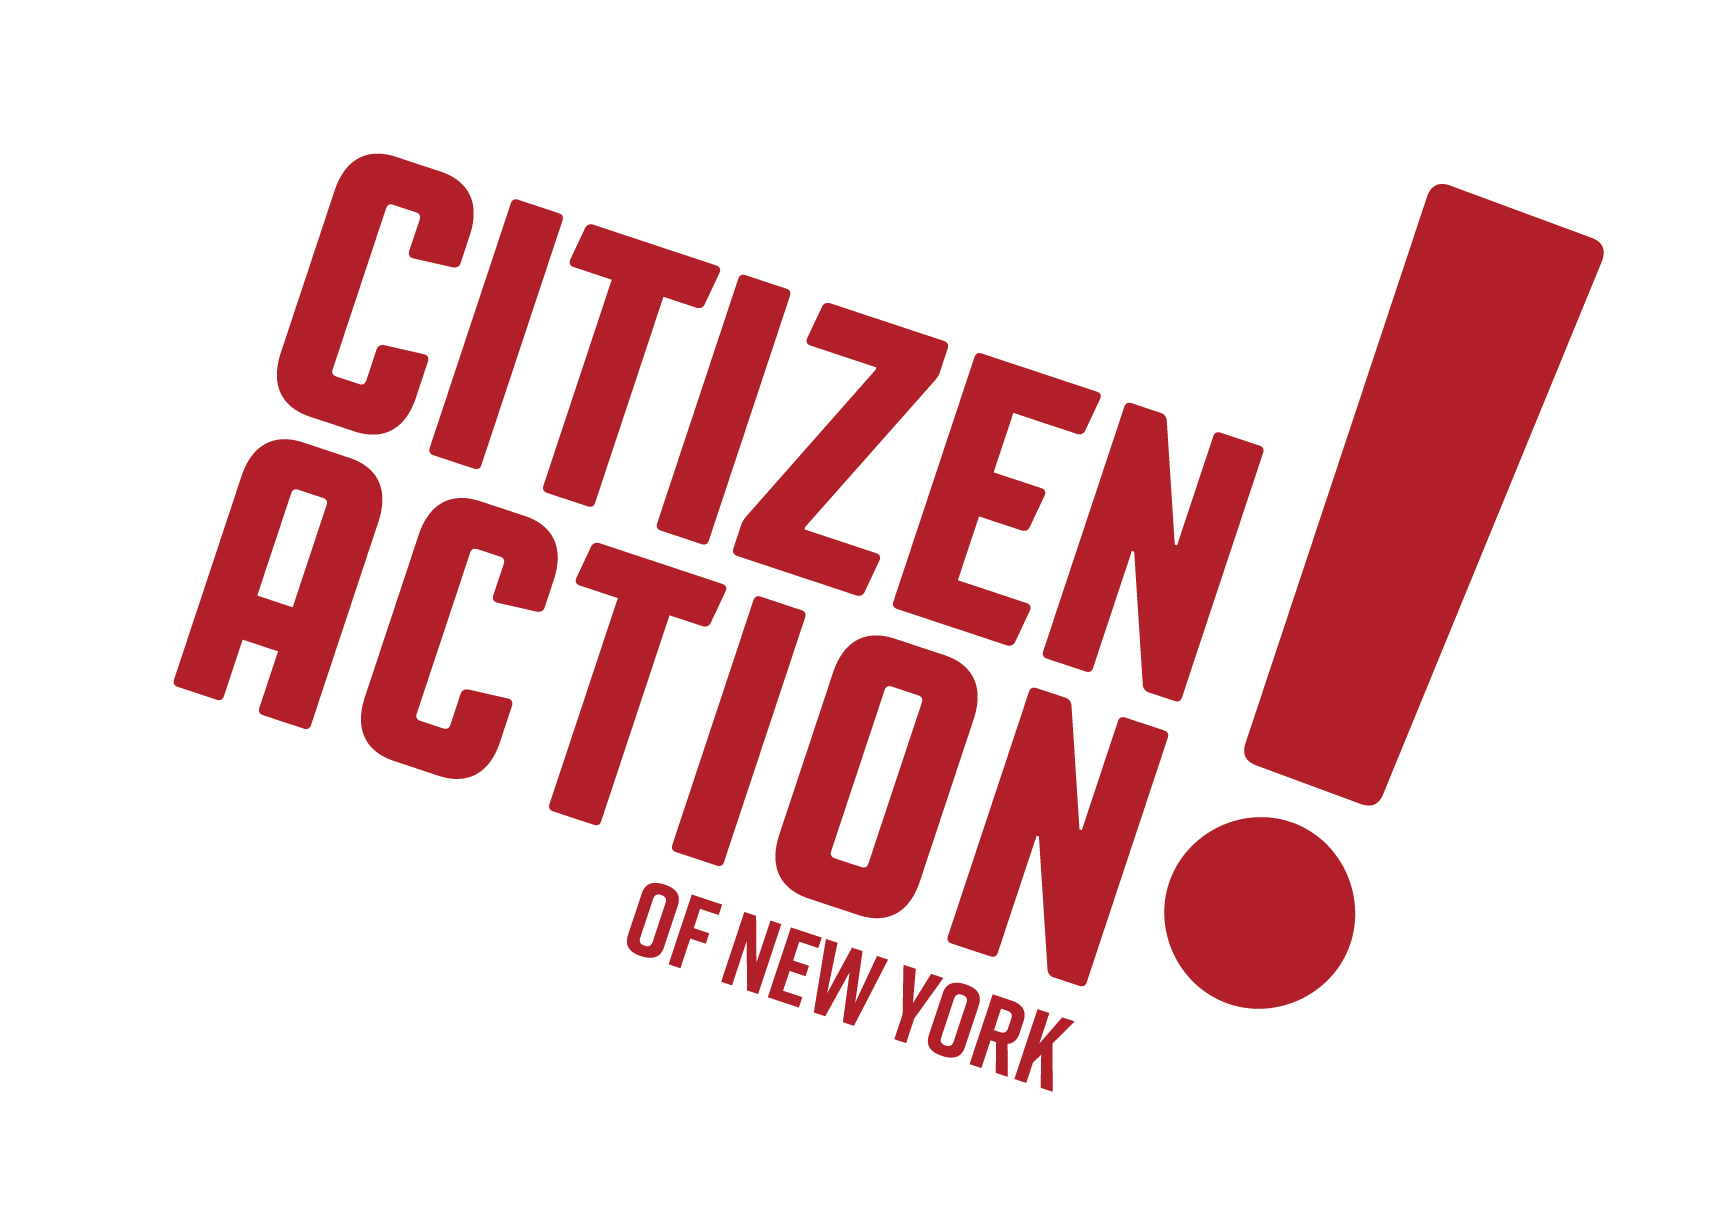 Citizen Action of New York